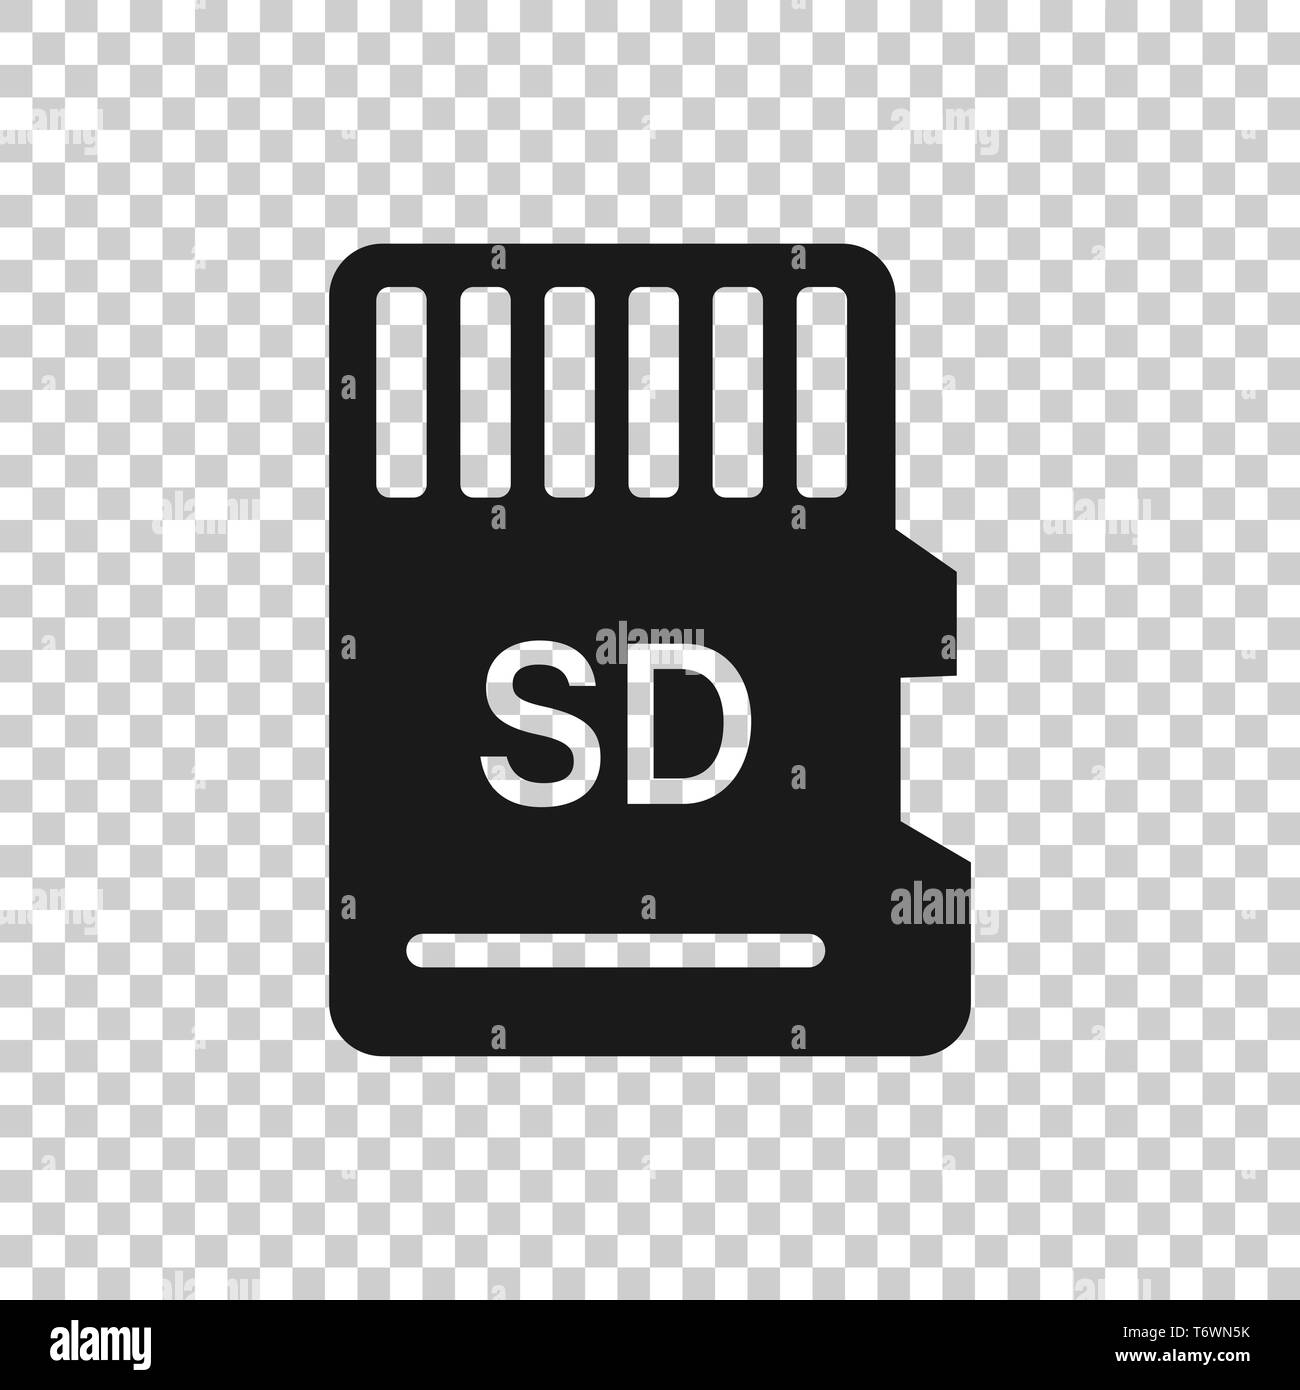 Micro SD card icon in transparent style. Memory chip vector illustration on isolated background. Storage adapter business concept. Stock Vector